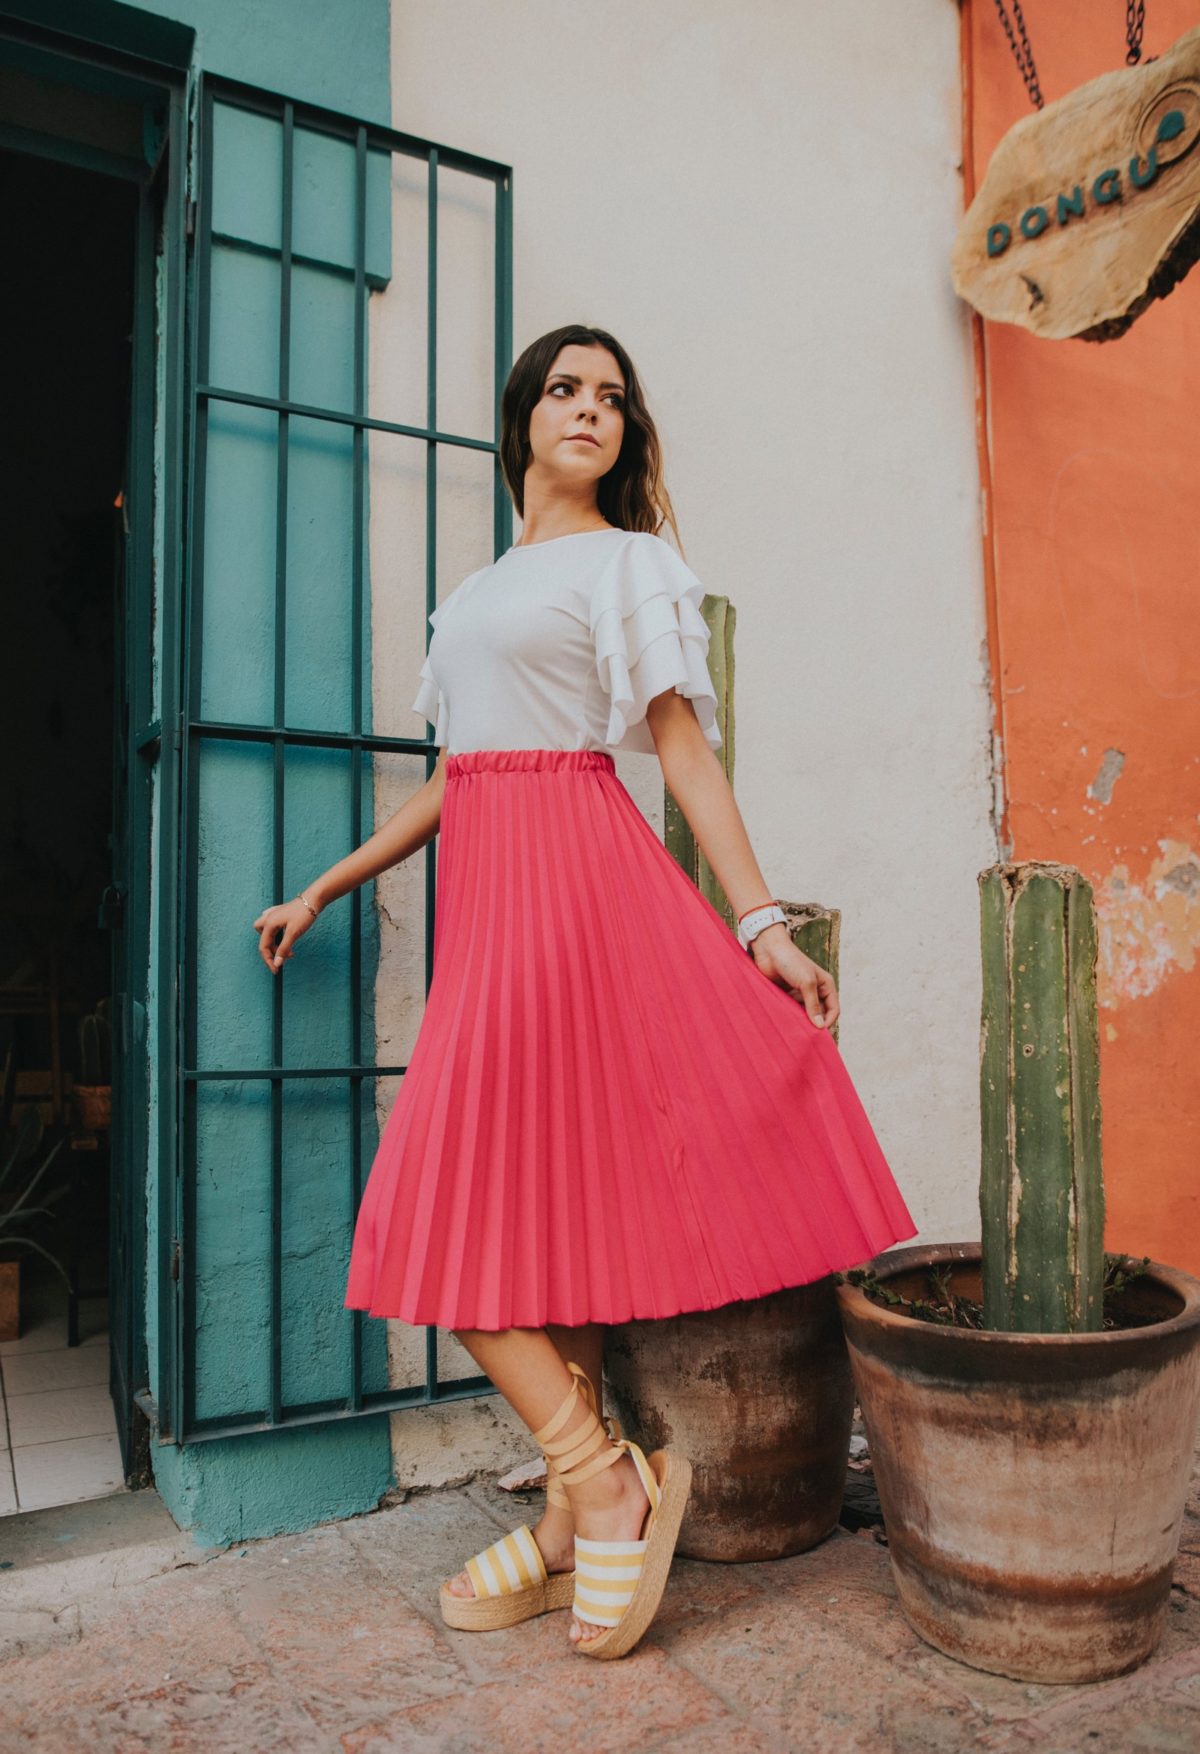 Pleated skirt is in fashion: How to wear it + outfit ideas for work or